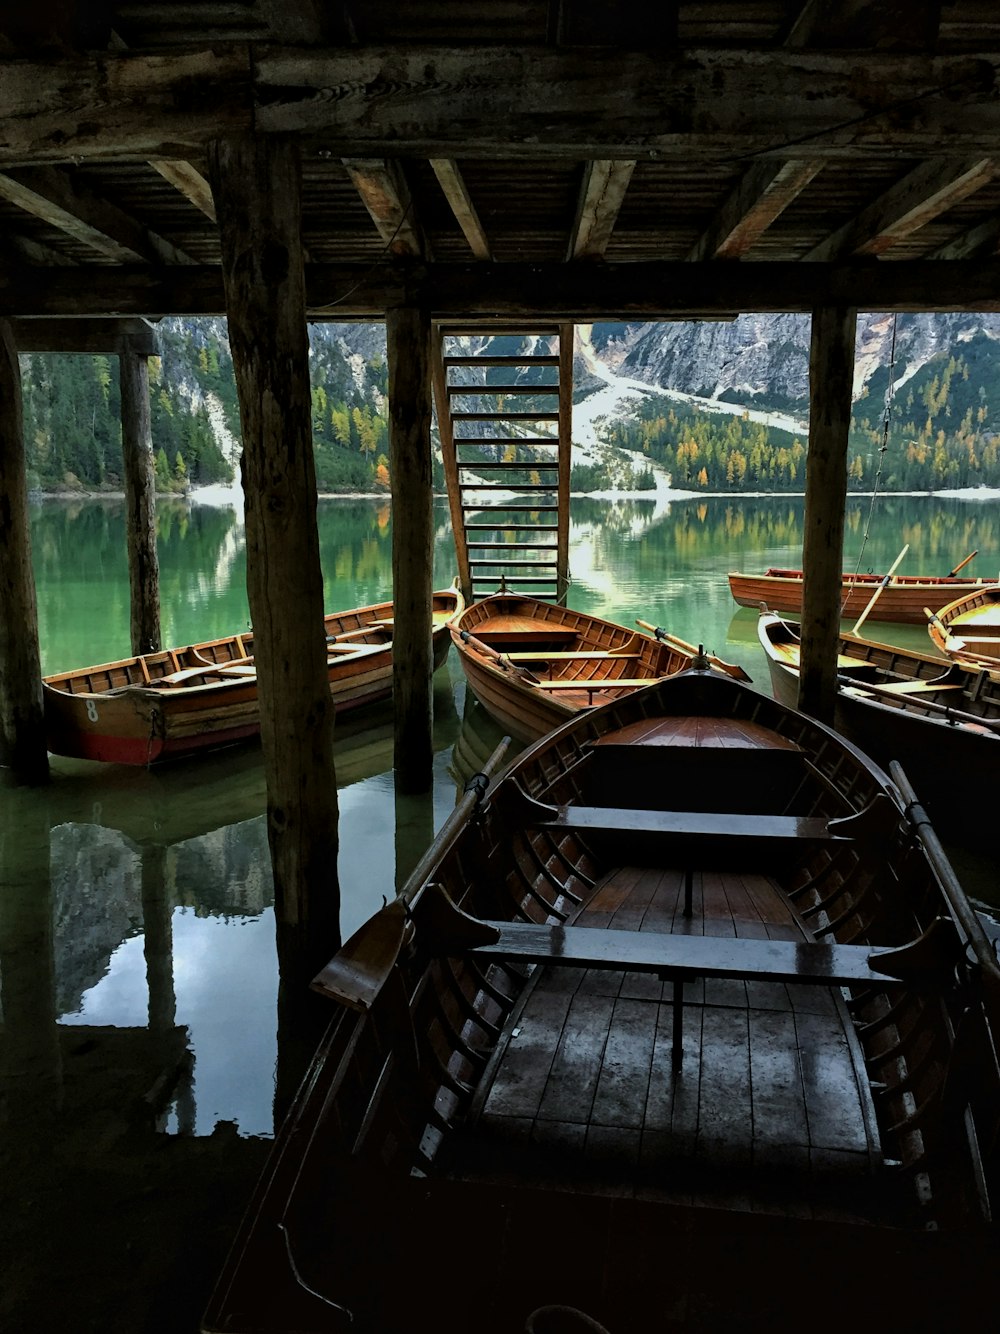 a wooden boat in a lake